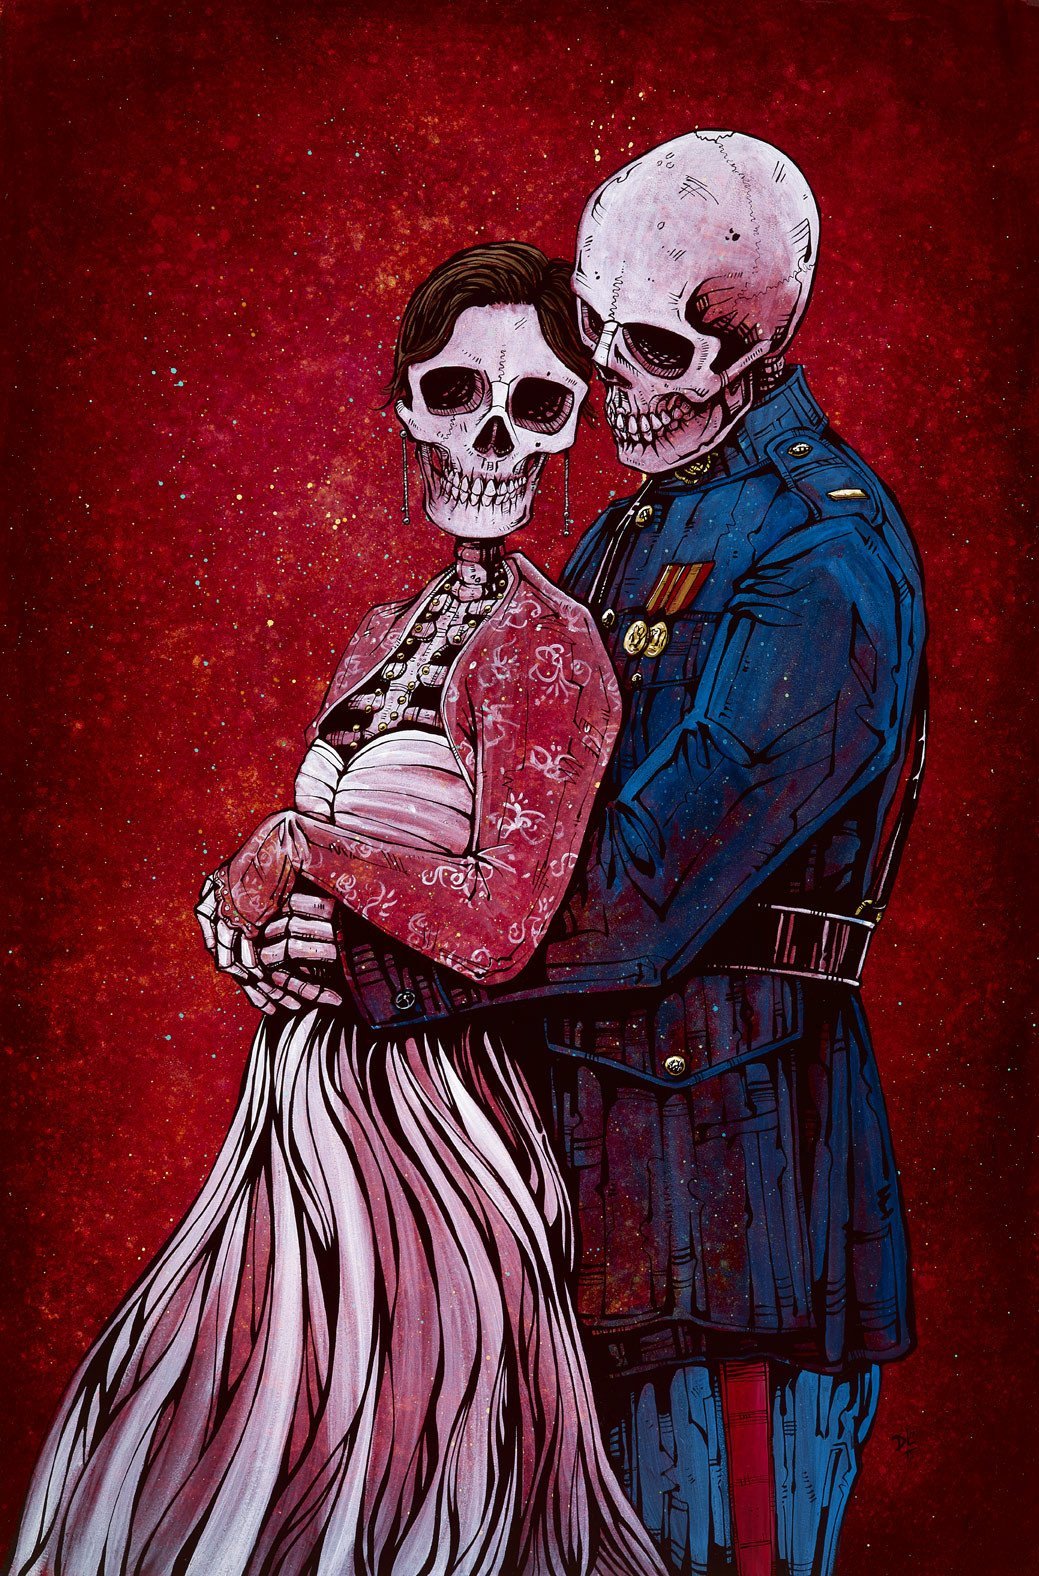 For Love and Country by Day of the Dead Artist David Lozeau, Day of the Dead Art, Dia de los Muertos Art, Dia de los Muertos Artist